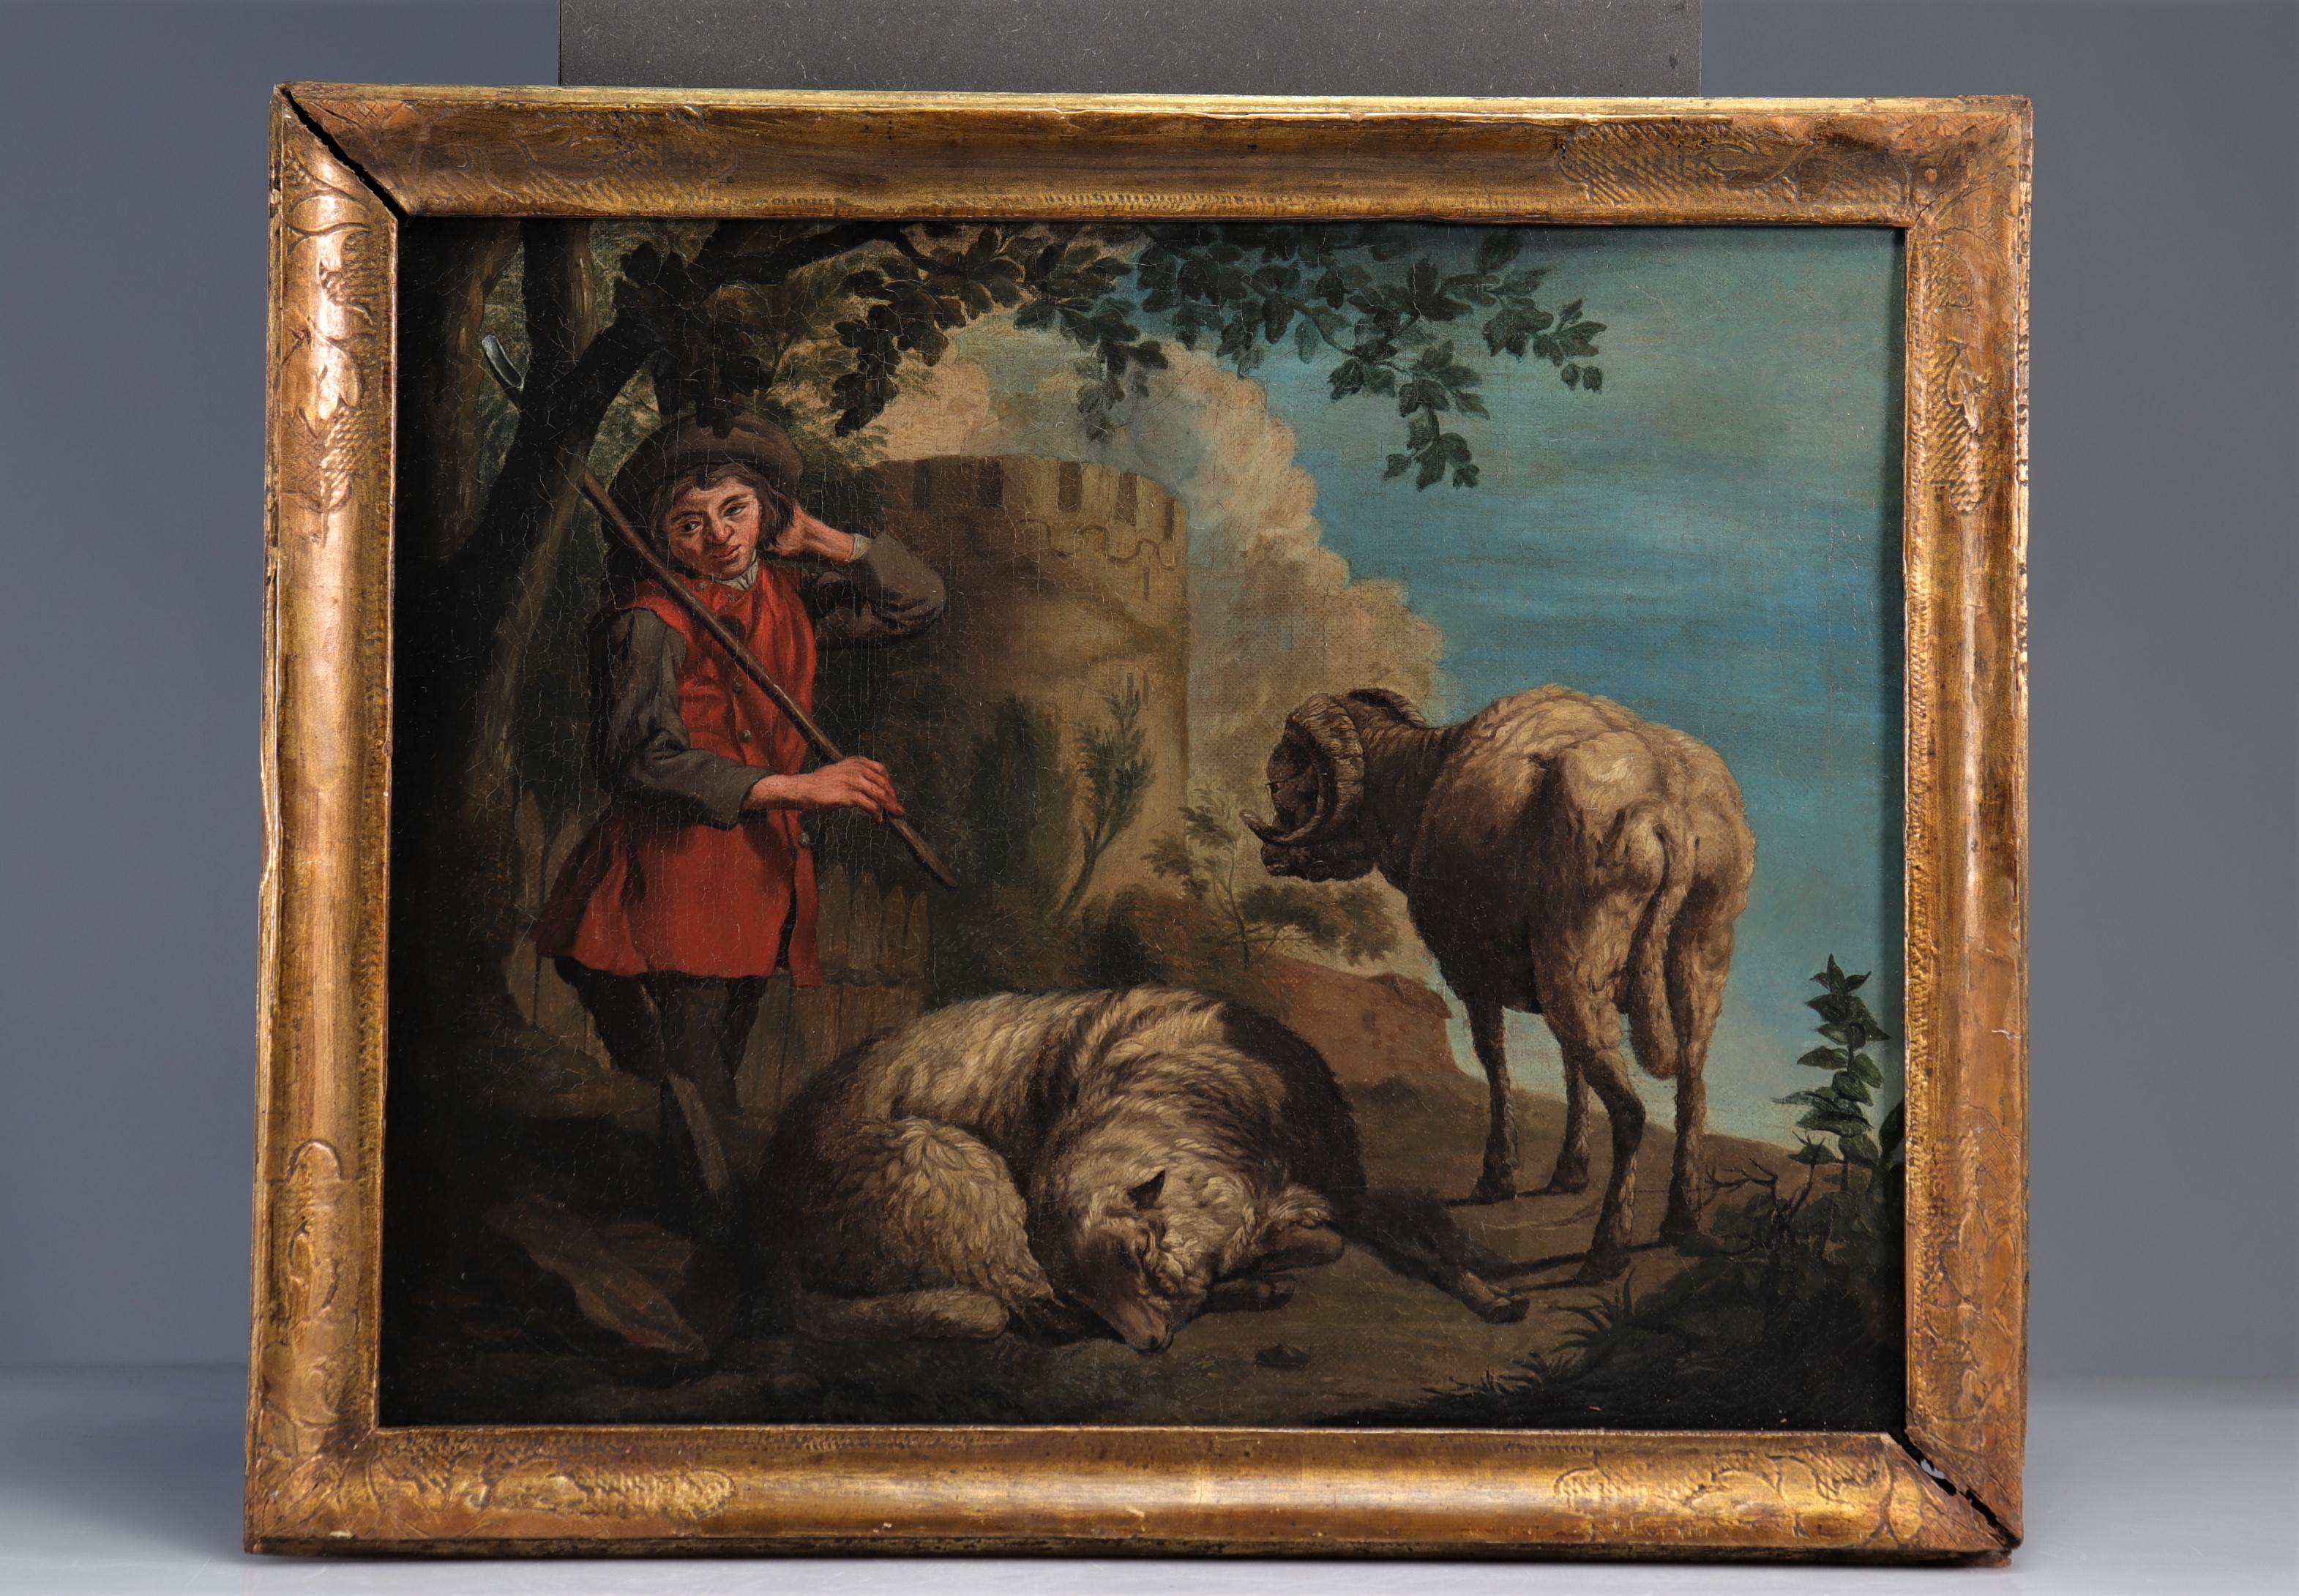 Oil on canvas from the Louis XIV period, "The Shepherd" 17th century frame - Image 2 of 2